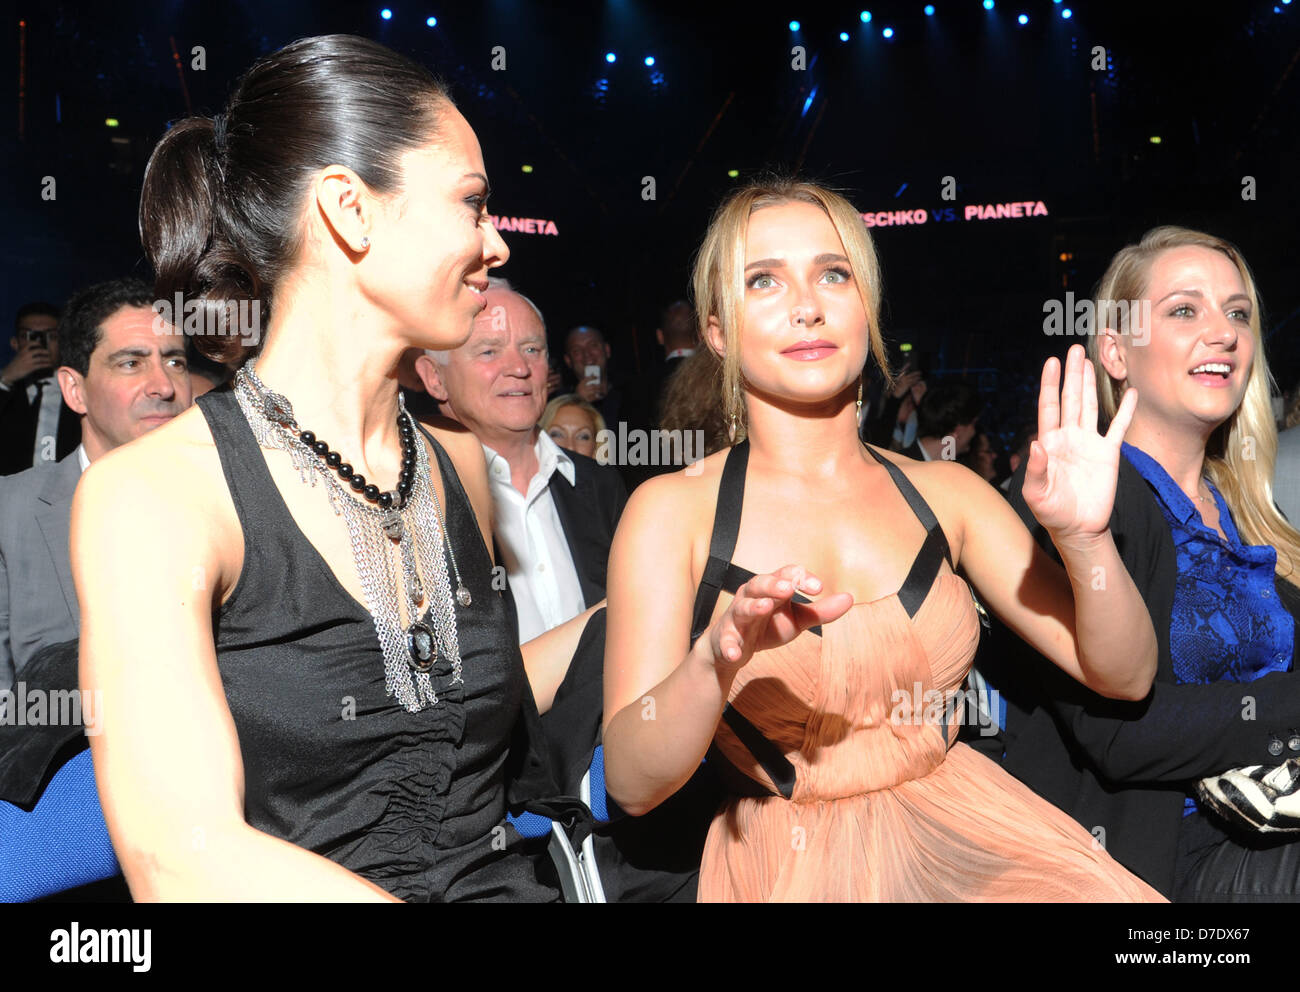 US actress Hayden Panettiere (C) and wife of Vitali Klitschko, Natali (L), attend the boxing fight between Ukrainian heavyweight IBF, WBO and IBO world champion Wladimir Klitschko and German-Italian challenger Francesco Pianeta at SAP Arena in Mannheim, Germany, 04 May 2013. Klitschko won the fight in the sixth round by knock out. Photo: Uli Deck Stock Photo